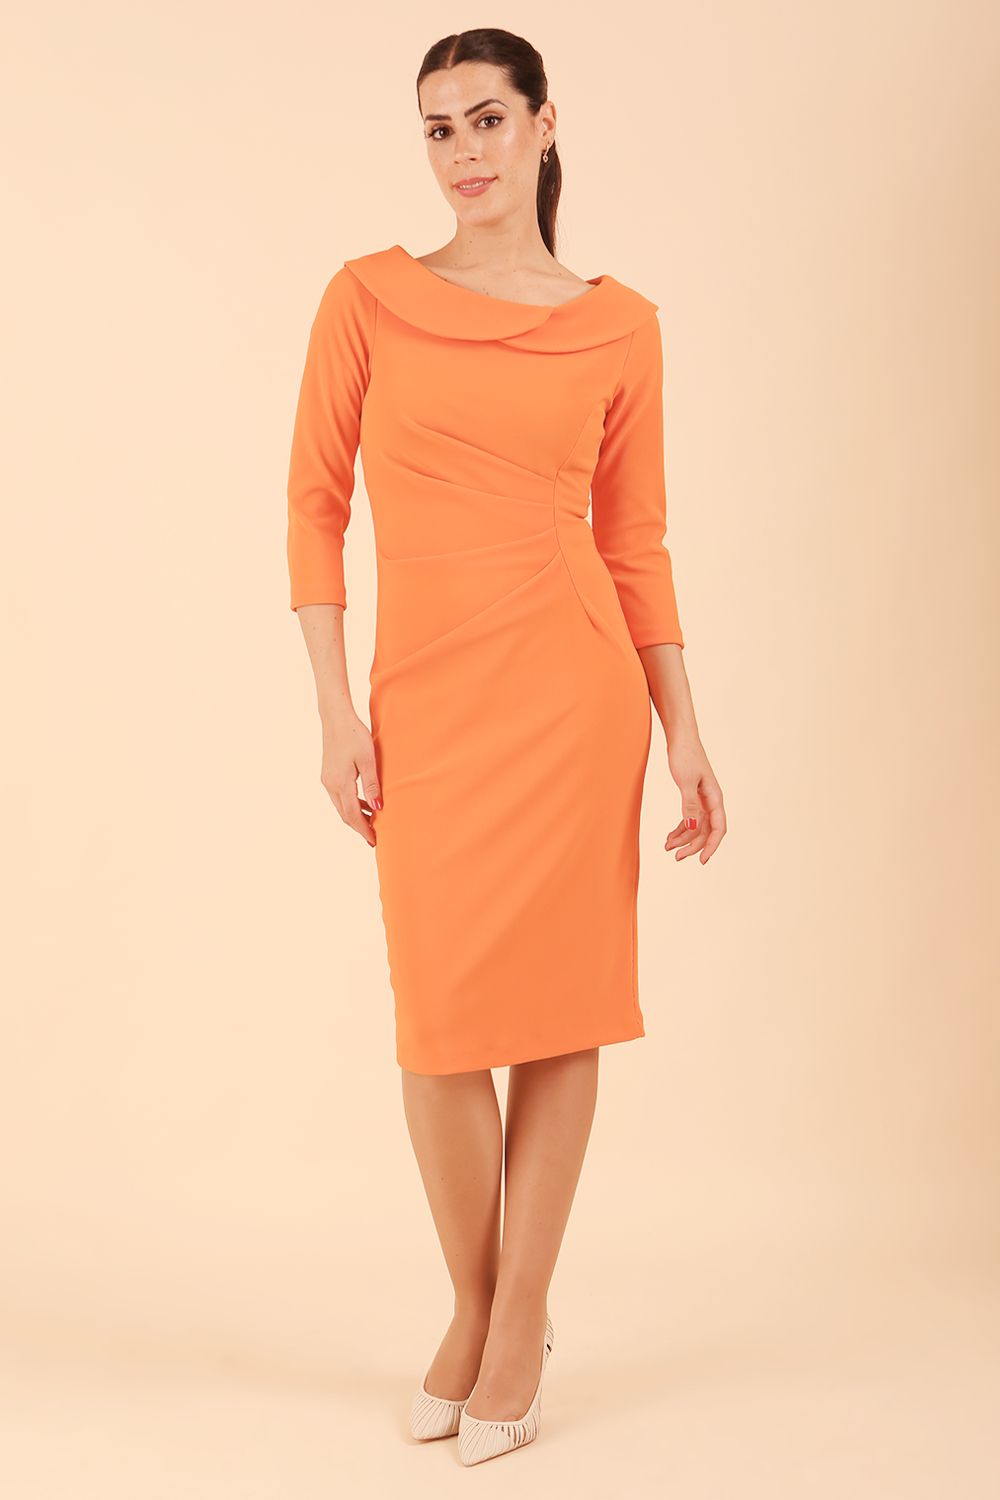 Model wearing diva catwalk Monique 3/4 Sleeve Pencil Dress with Overlapping Folded Round Neckline and 3/4 sleeves and knee length in Golden Poppy front